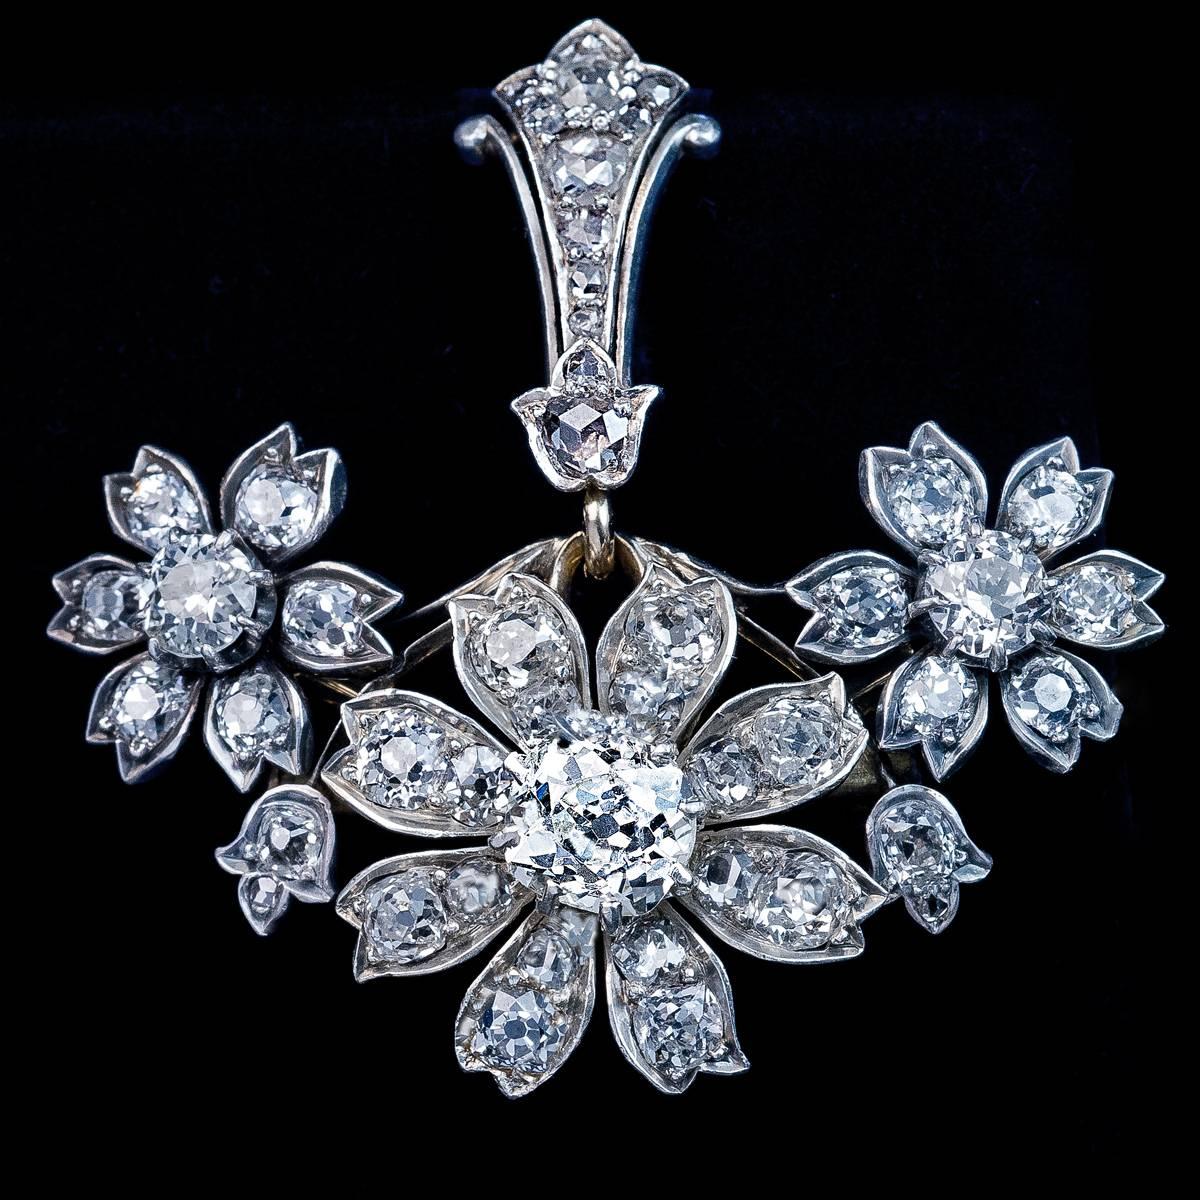 A convertible pendant / brooch of a floral design from the late 1800s, handcrafted in silver topped gold and set with old cushion cut, old European and old mine cut diamonds. The bail is embellished with old rose cut diamonds.

The center diamond